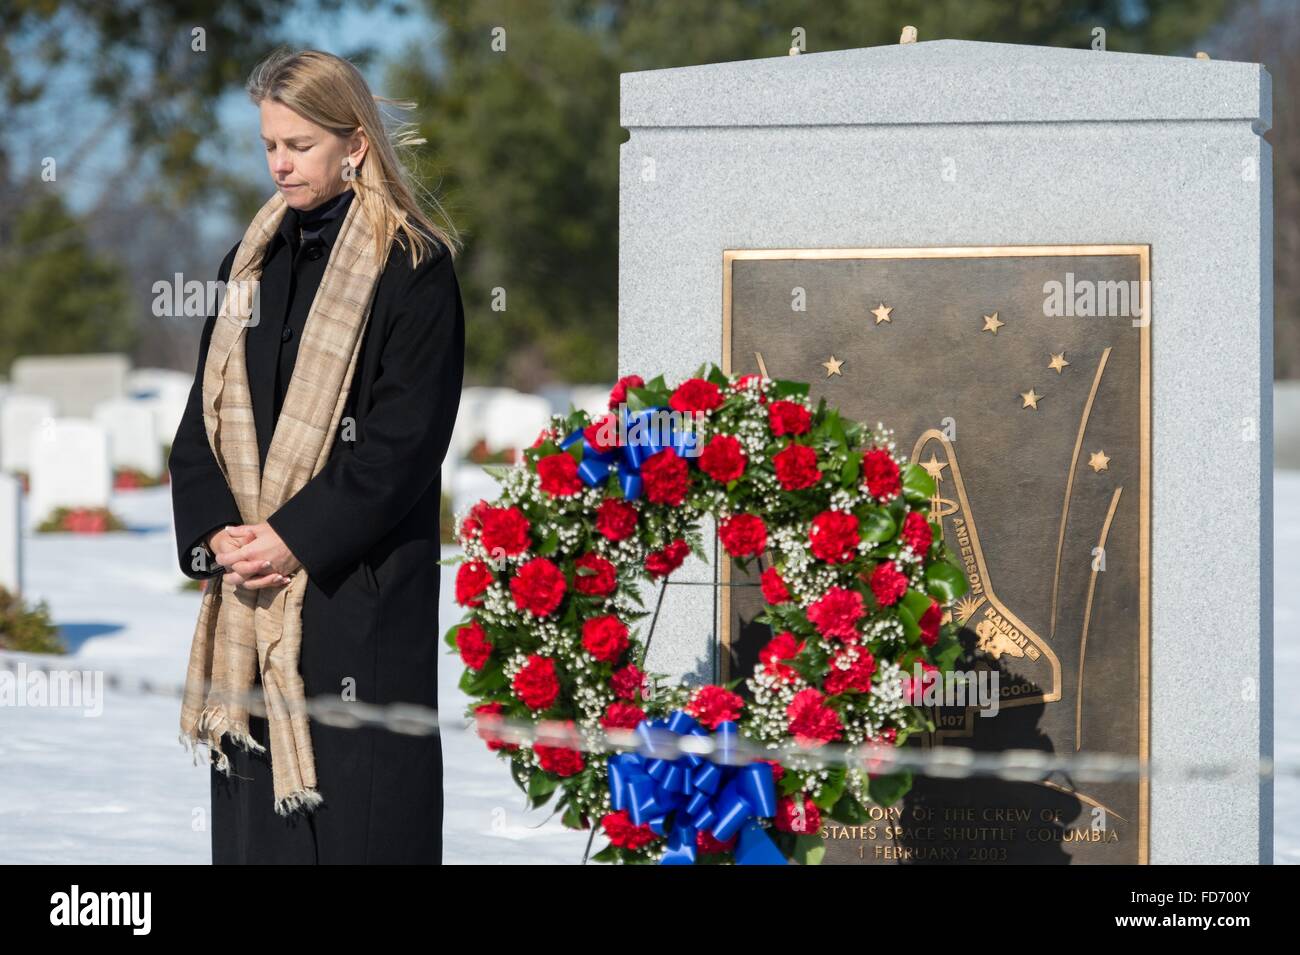 Arlington, Virginia, USA. 28th January, 2016. NASA Deputy Administrator Dava Newman bows her head after placing a wreath at the Space Shuttle Challenger Memorial as part of NASA's Day of Remembrance on the 30th anniversary of the Challenger explosion at Arlington National Cemetery January 28, 2016 in Arlington, Virginia. The wreaths were placed in memory of those men and women who lost their lives in the quest for space exploration. Stock Photo